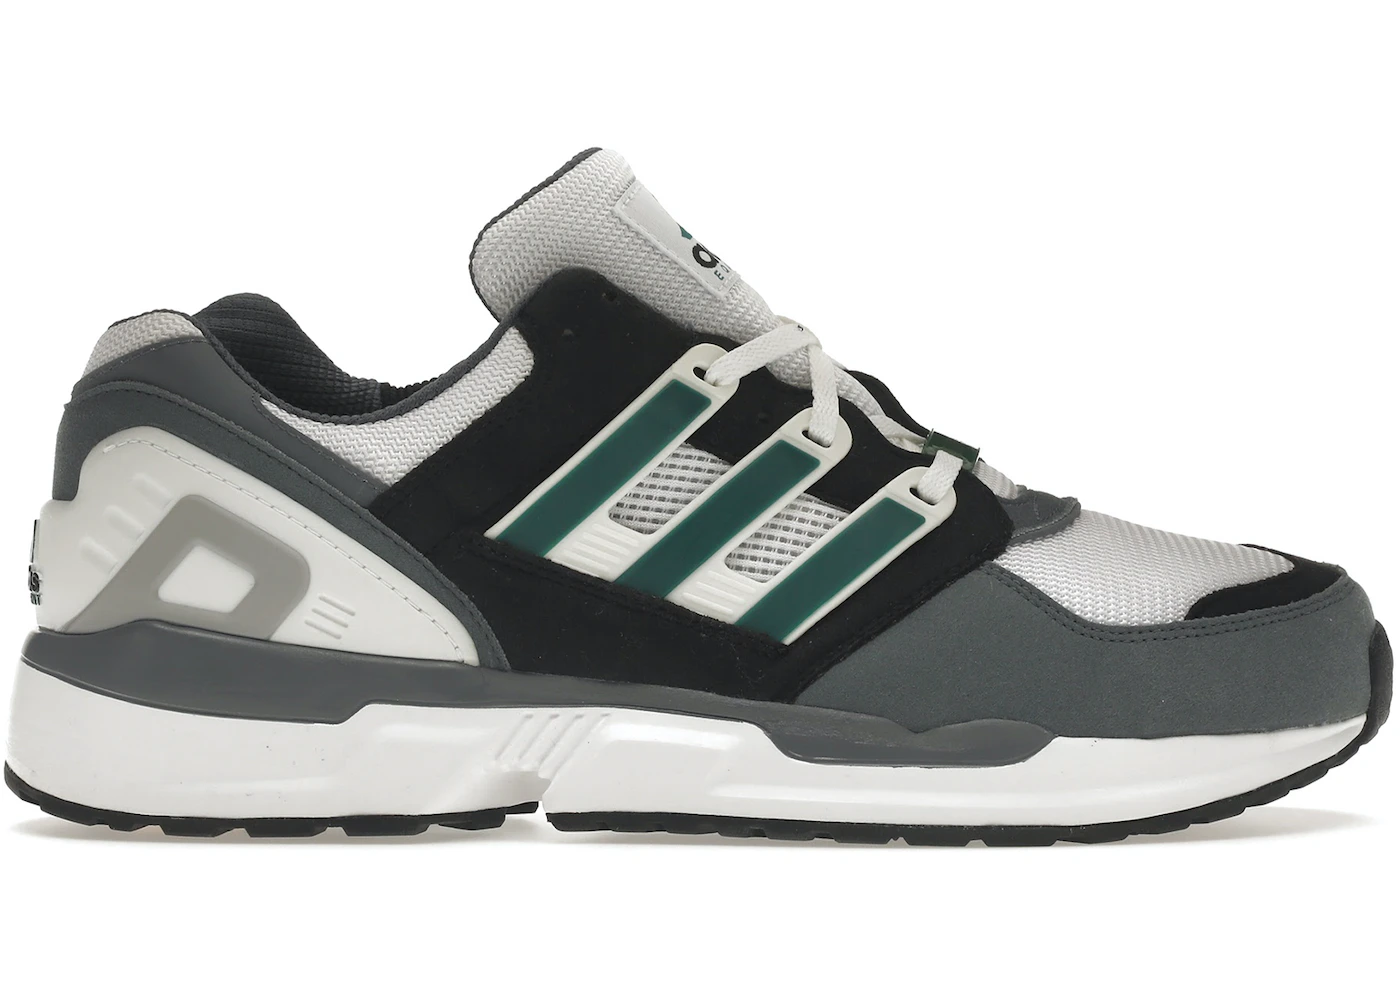 adidas EQT Support White Green Lead - G44421 US